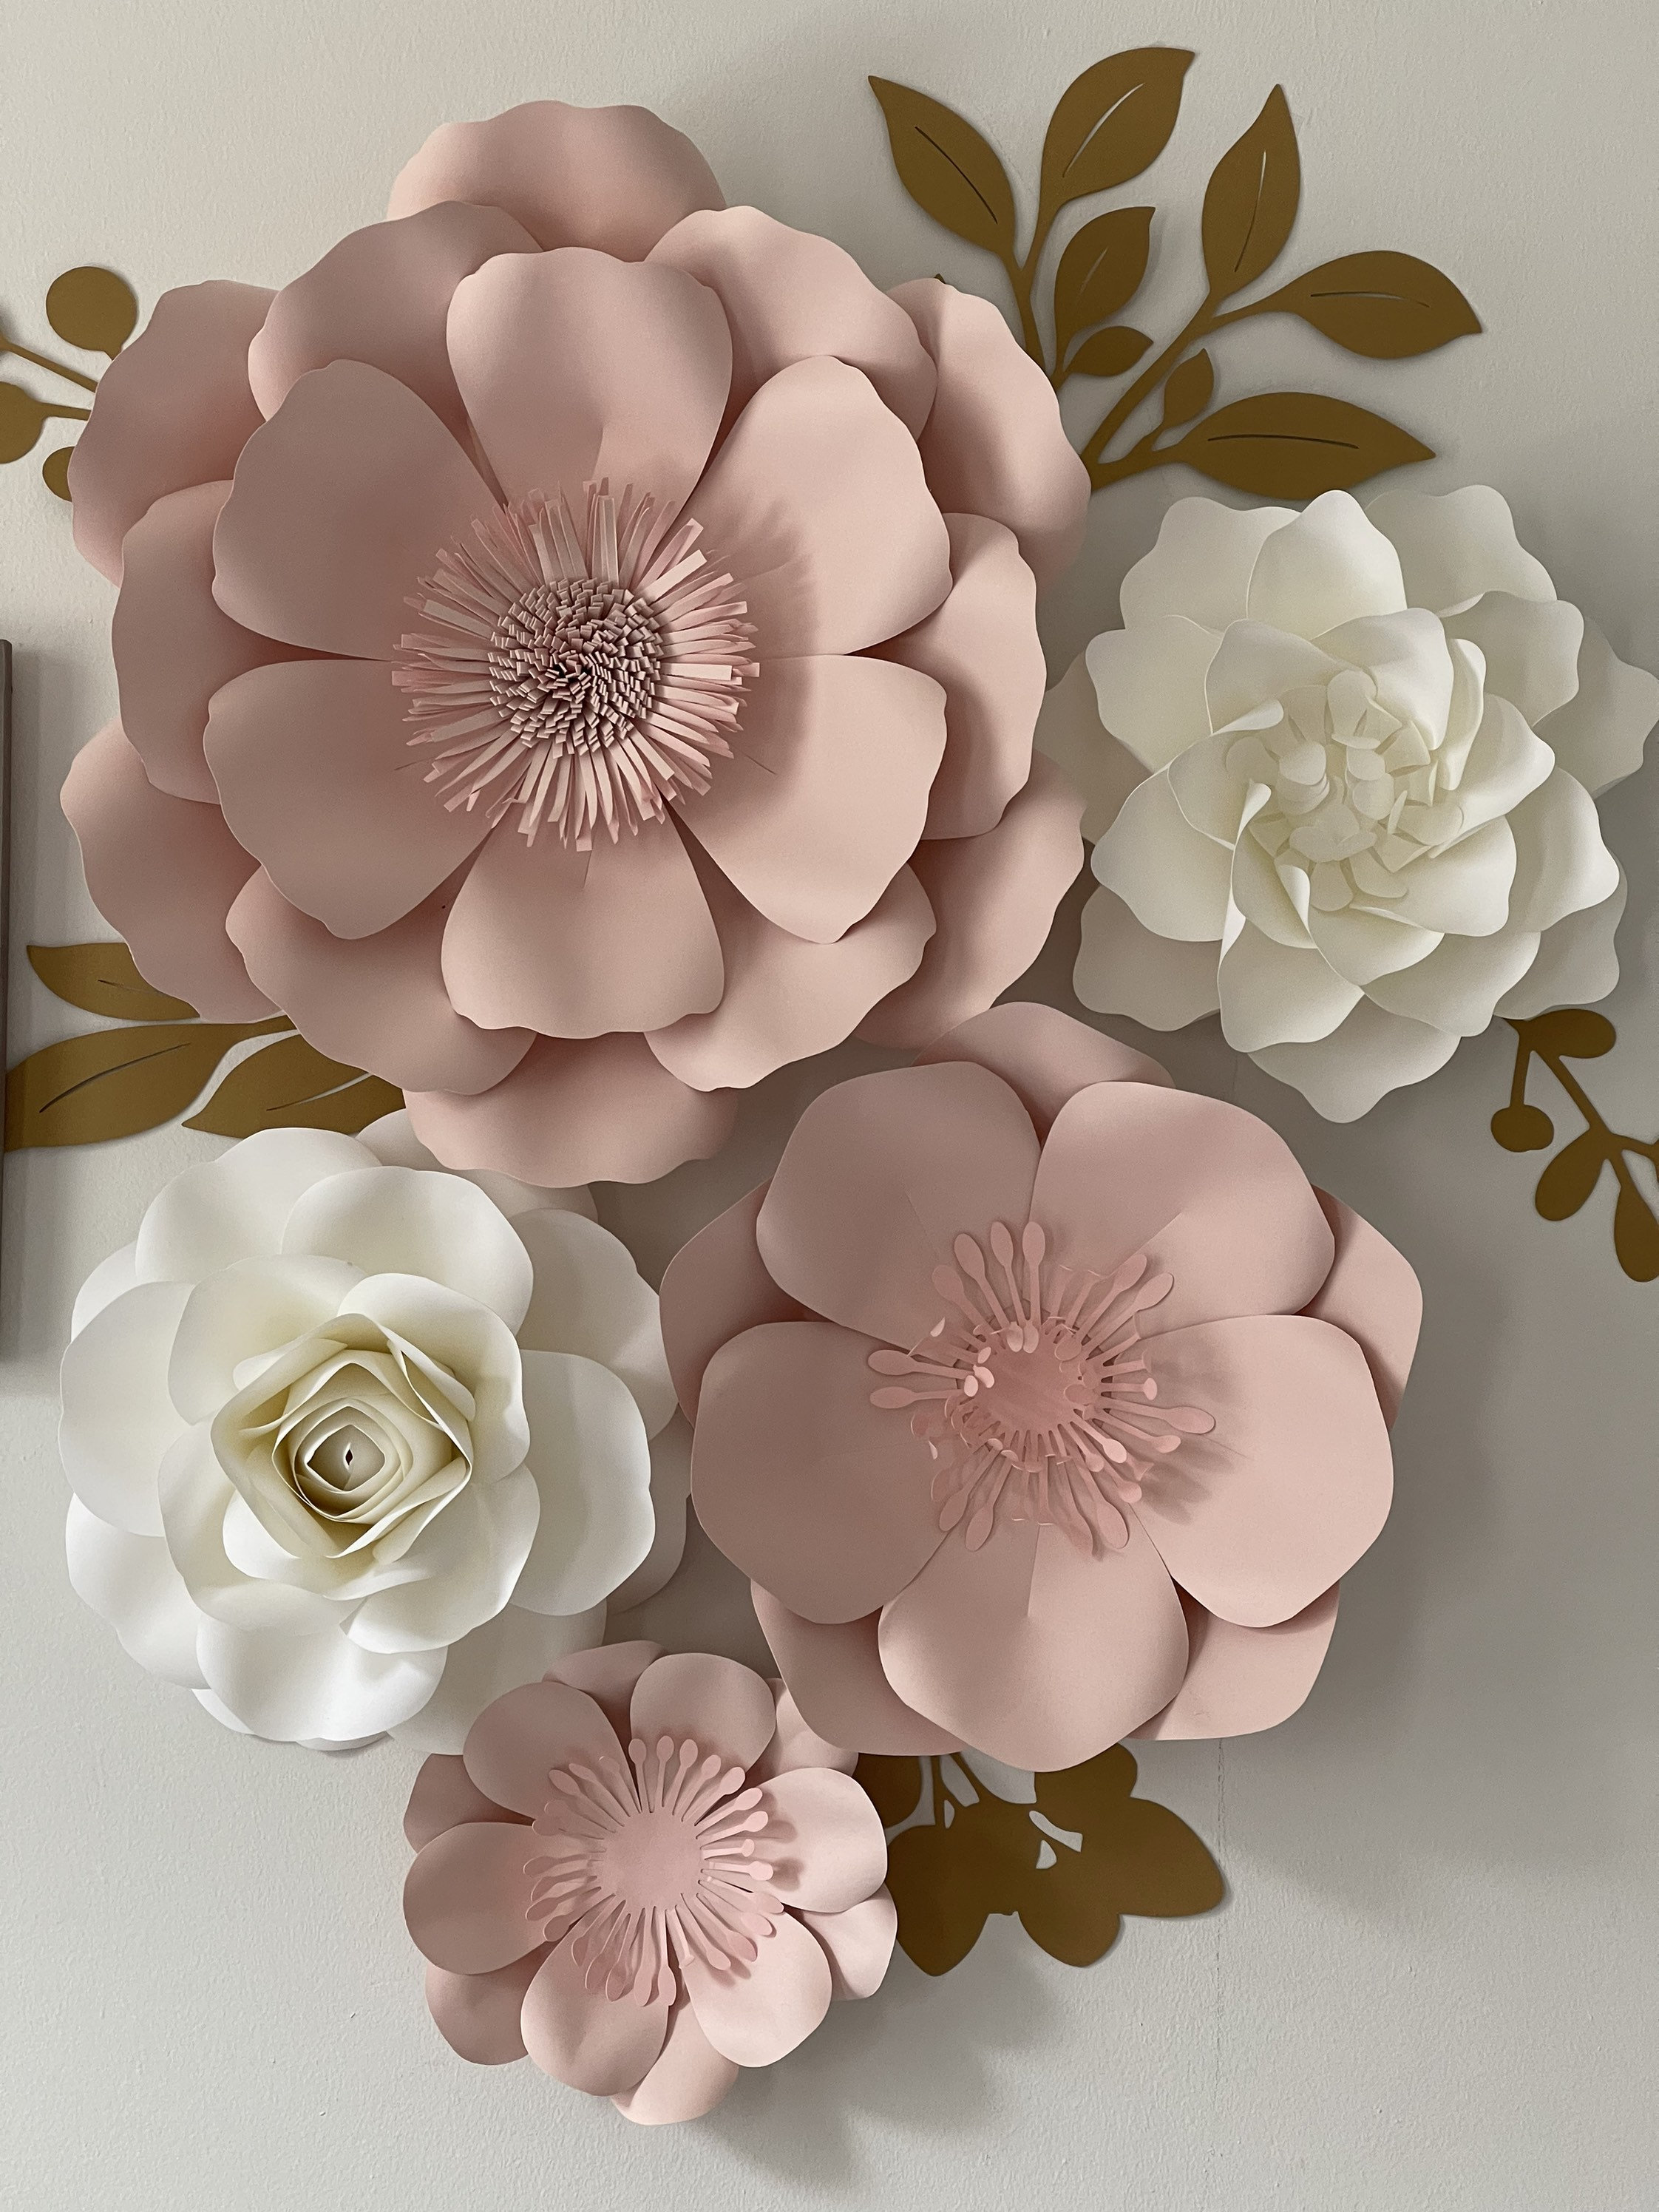  Paper Flowers Fall Backdrops - Includes 5 Paper Flowers 14 Paper  Leaves - Fully Assembled : Home & Kitchen